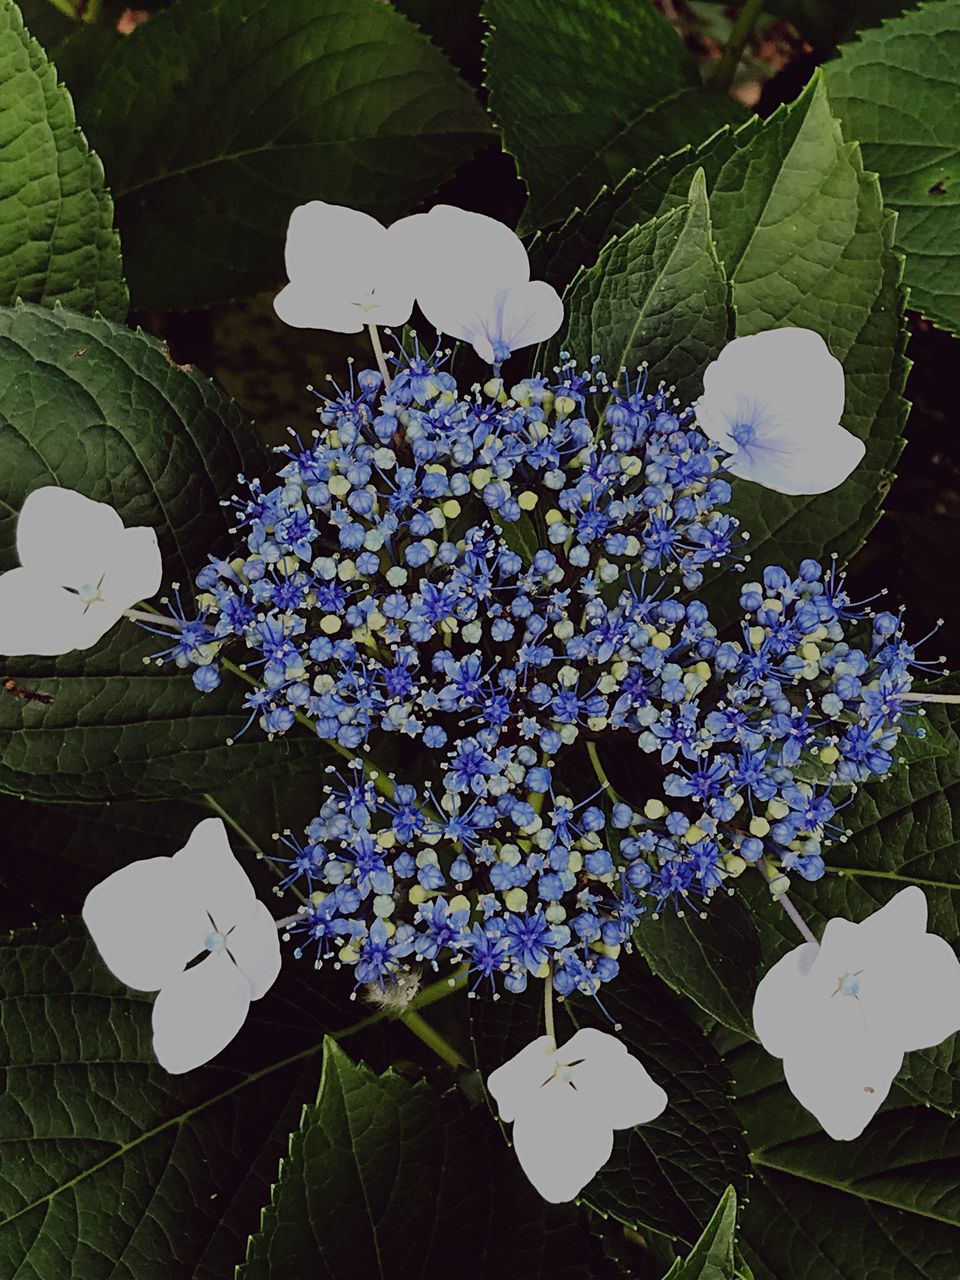 flower, flowering plant, plant, plant part, leaf, growth, beauty in nature, fragility, freshness, vulnerability, nature, close-up, petal, no people, purple, white color, inflorescence, flower head, day, botany, outdoors, lilac, bunch of flowers, lantana